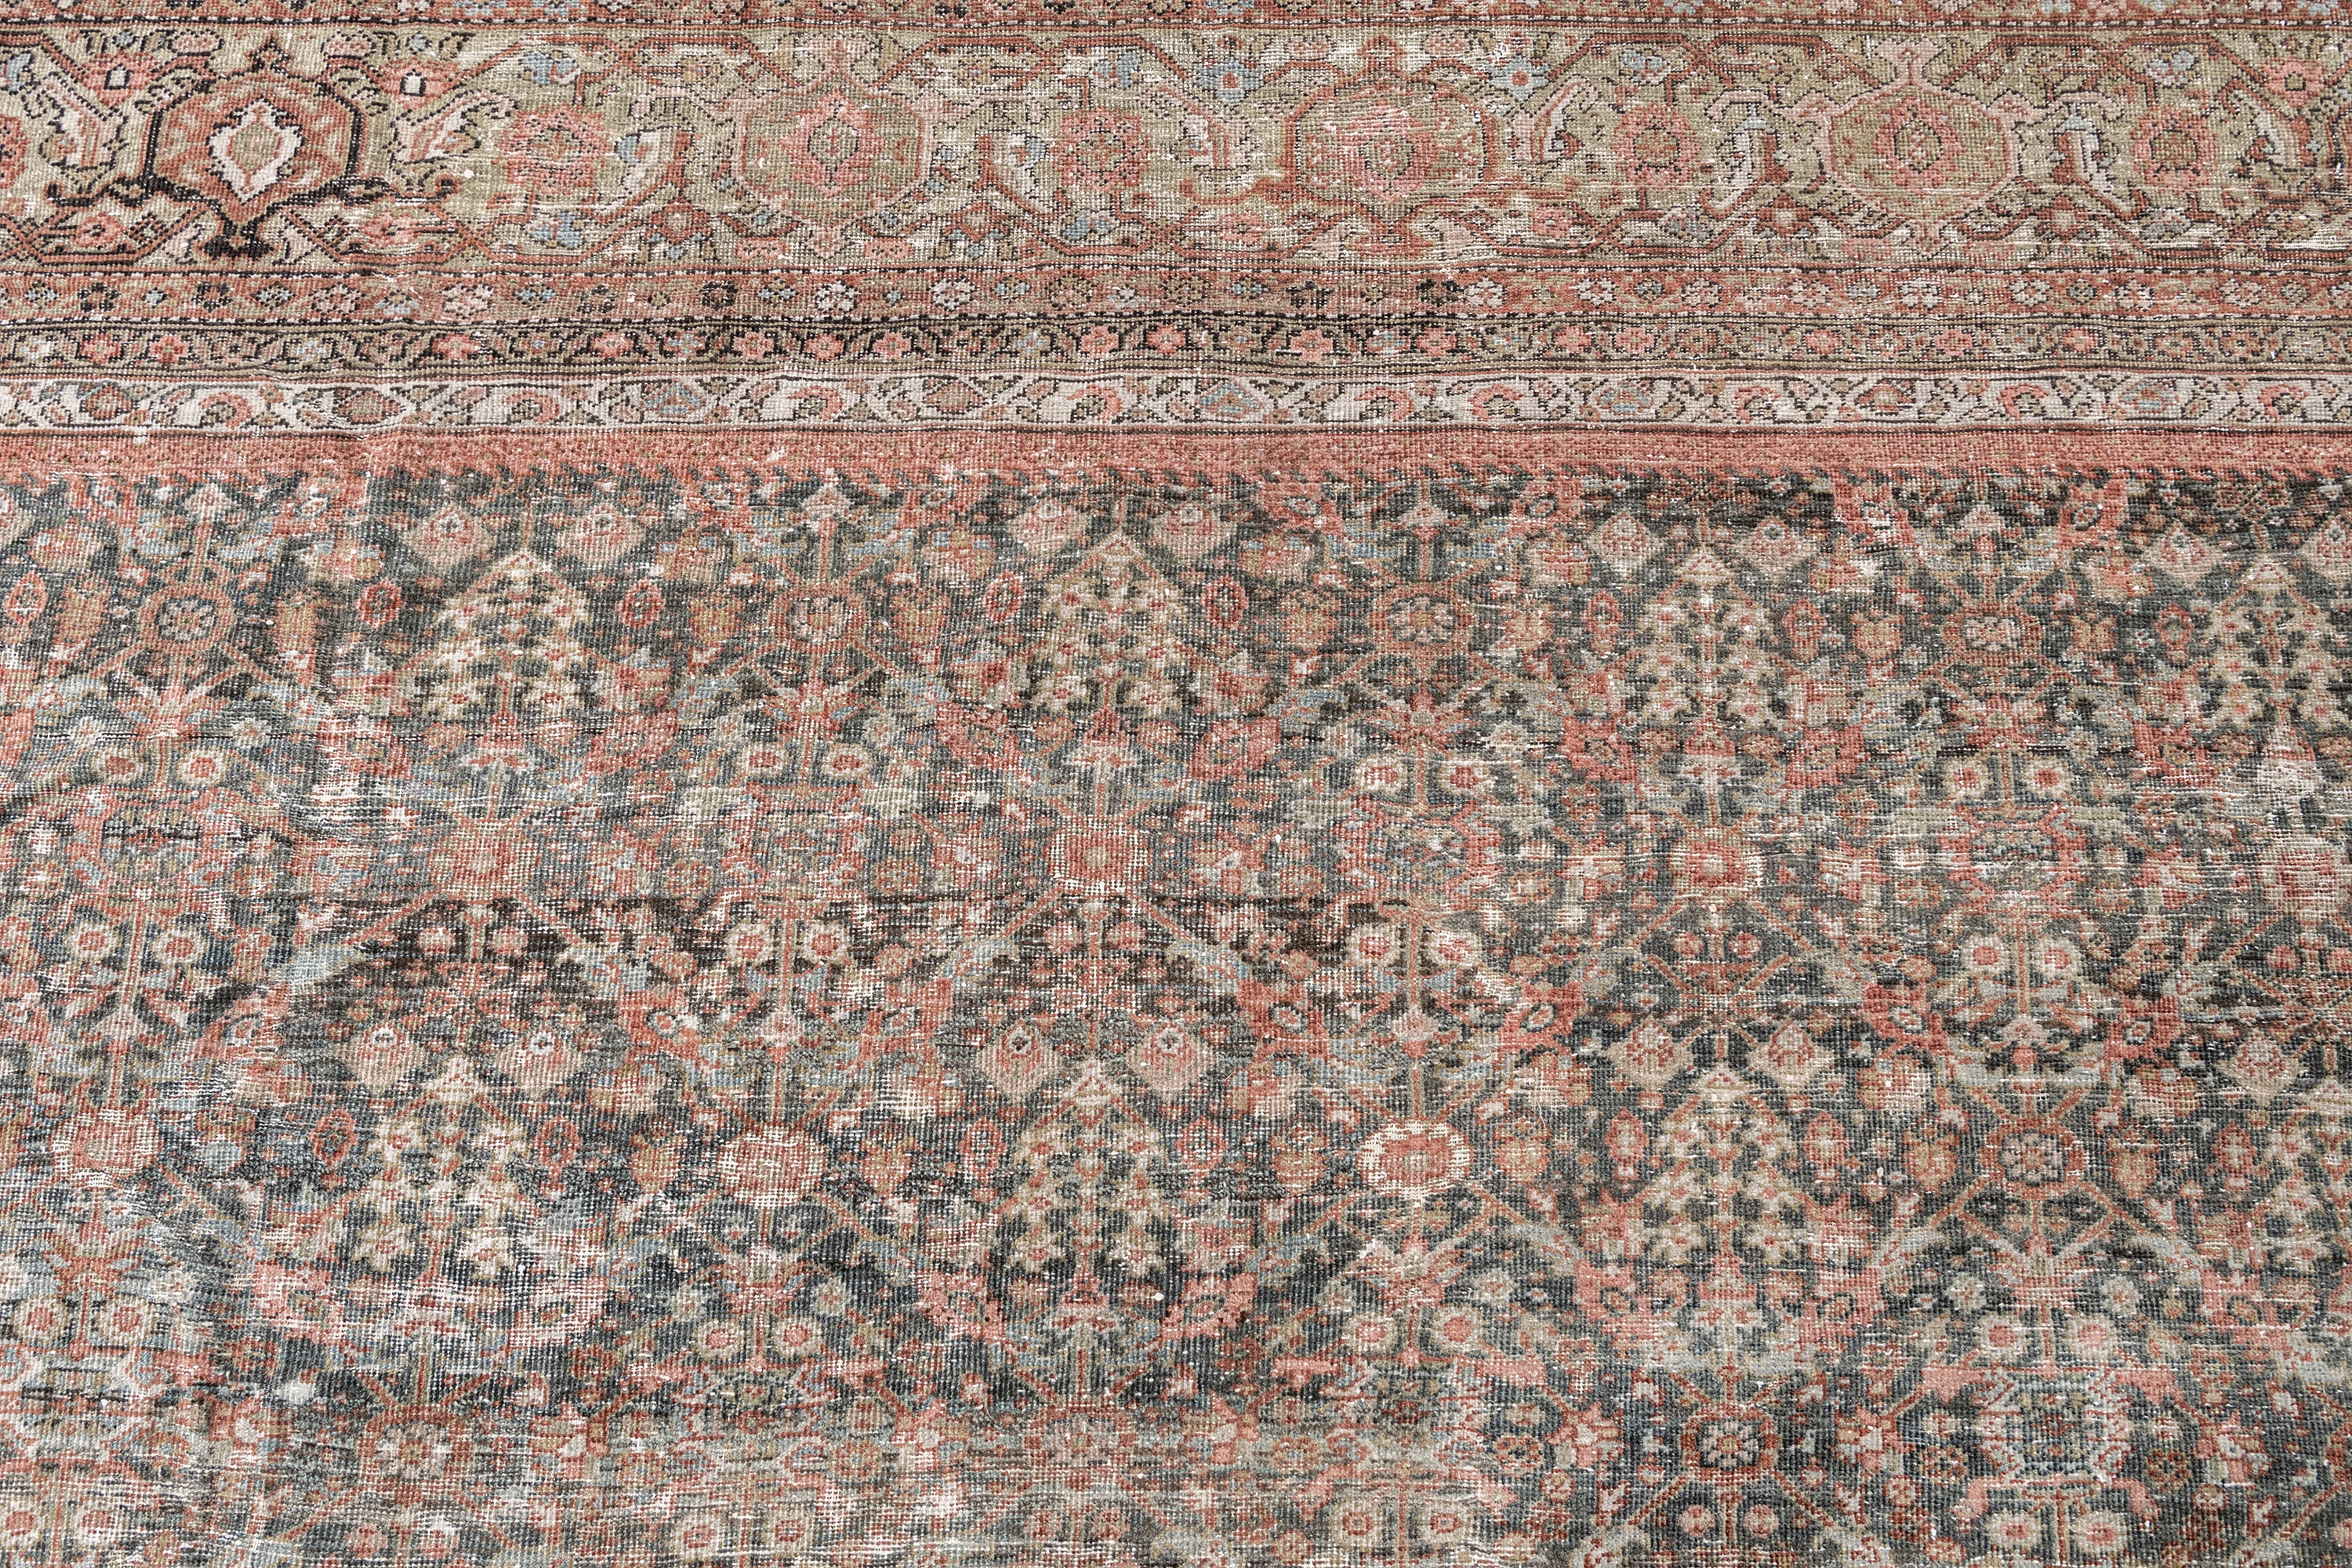 SULTANABAD RUG, AR31268, WEST PERSIA, 15'3" X 24'4" - thumbnail 4